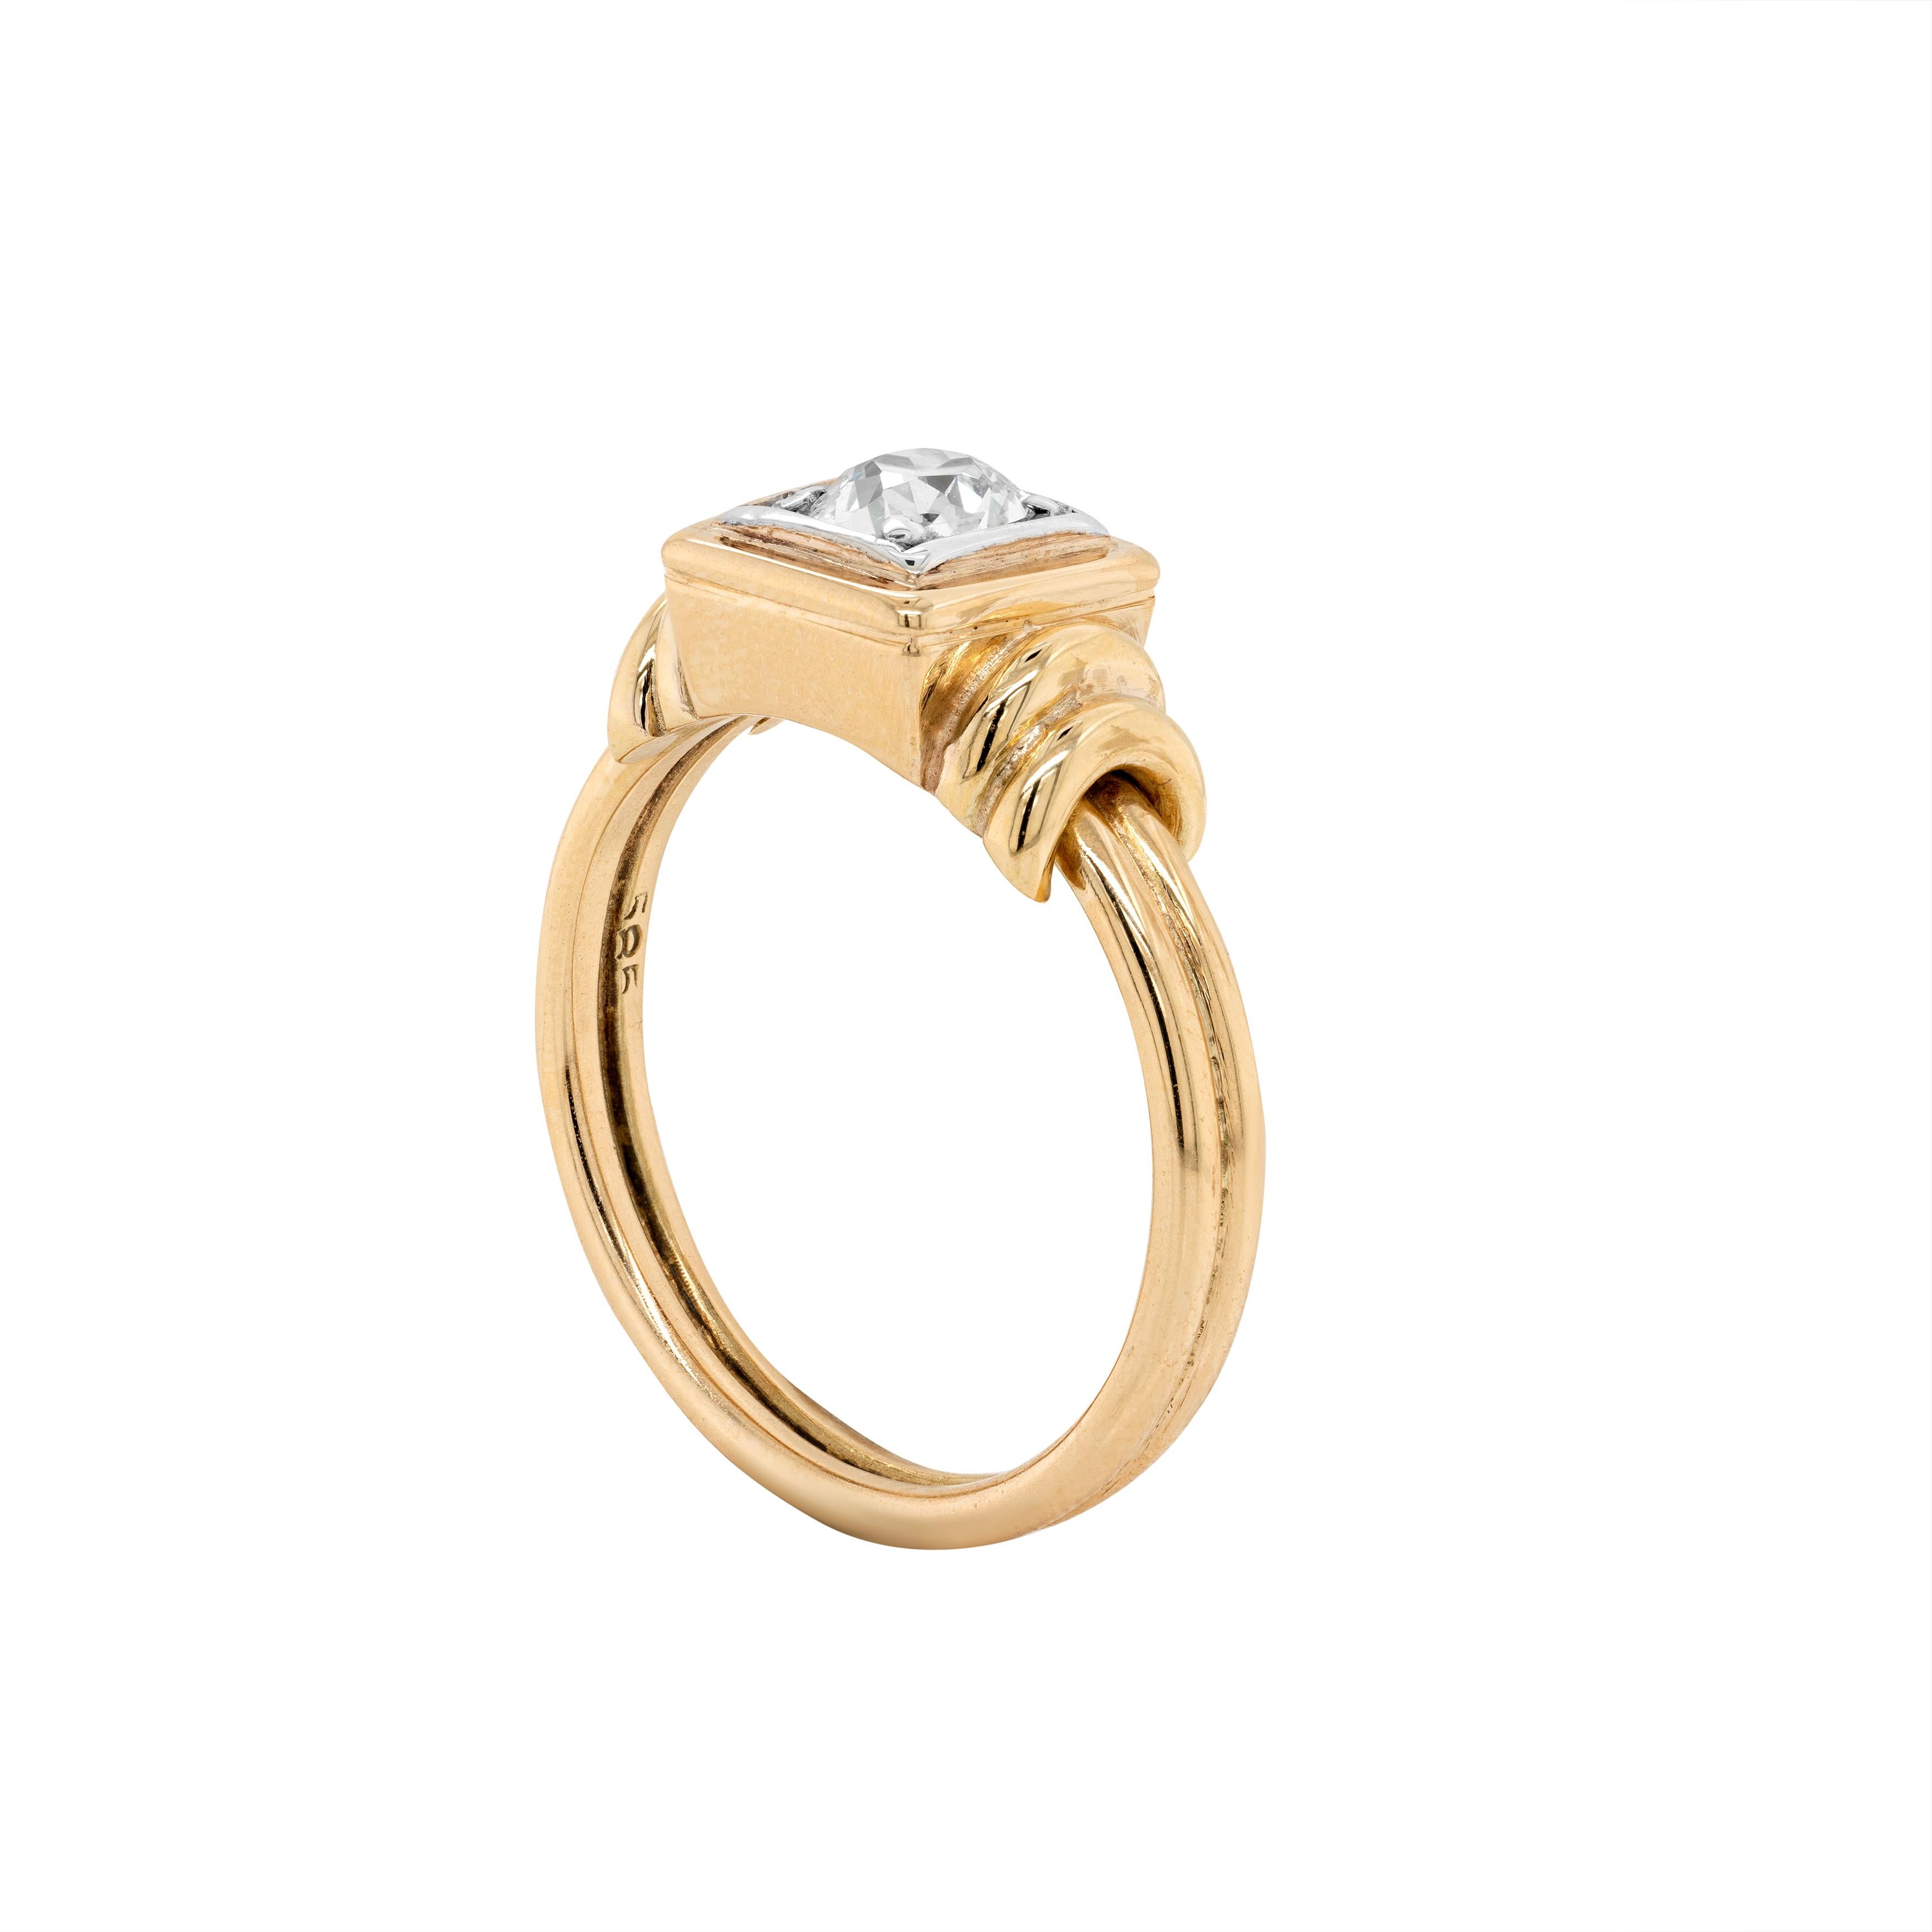 This gorgeous art deco style engagement ring features a beautiful old mine cut diamond weighing approximately 0.80ct, mounted in a 14 carat white and yellow gold square box setting. The piece is further decorated with yellow gold ring details